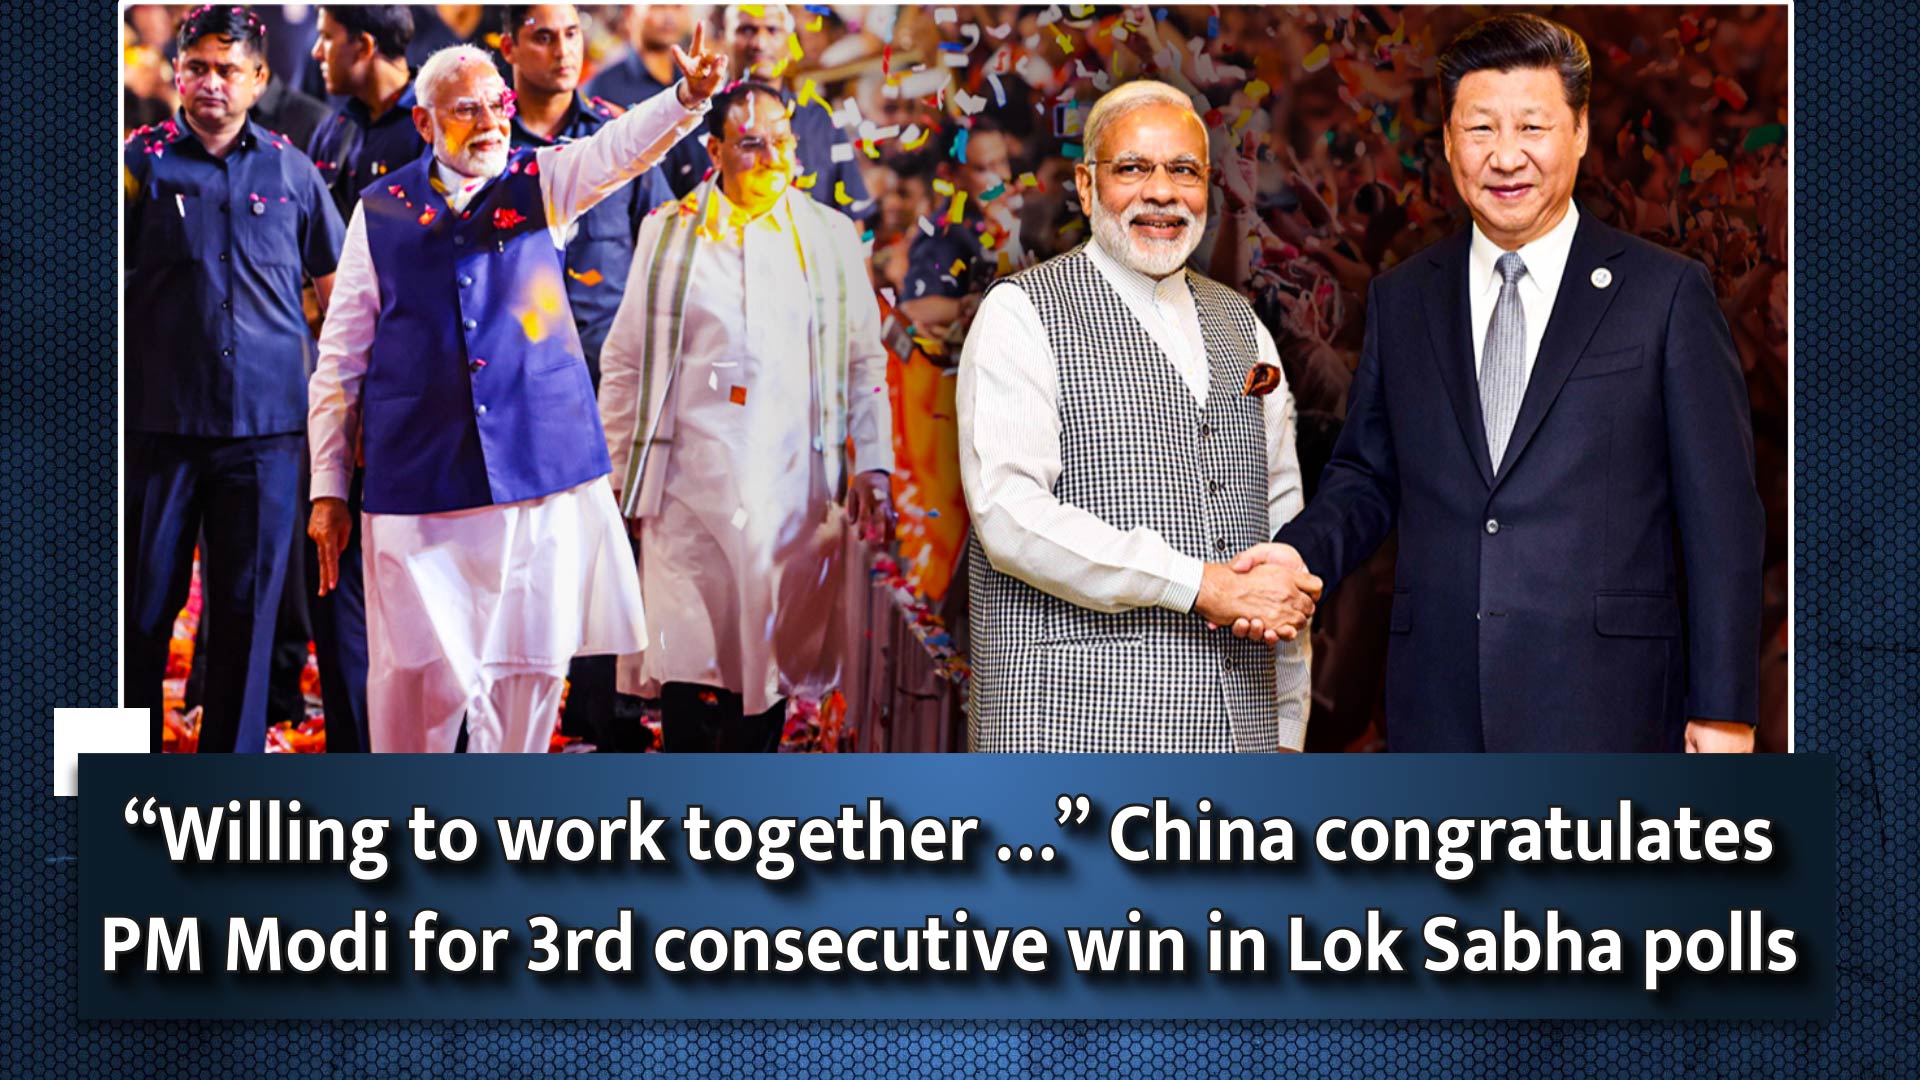 ``Willing to work together....`` China congratulates PM Modi for 3rd consecutive win in Lok Sabha polls